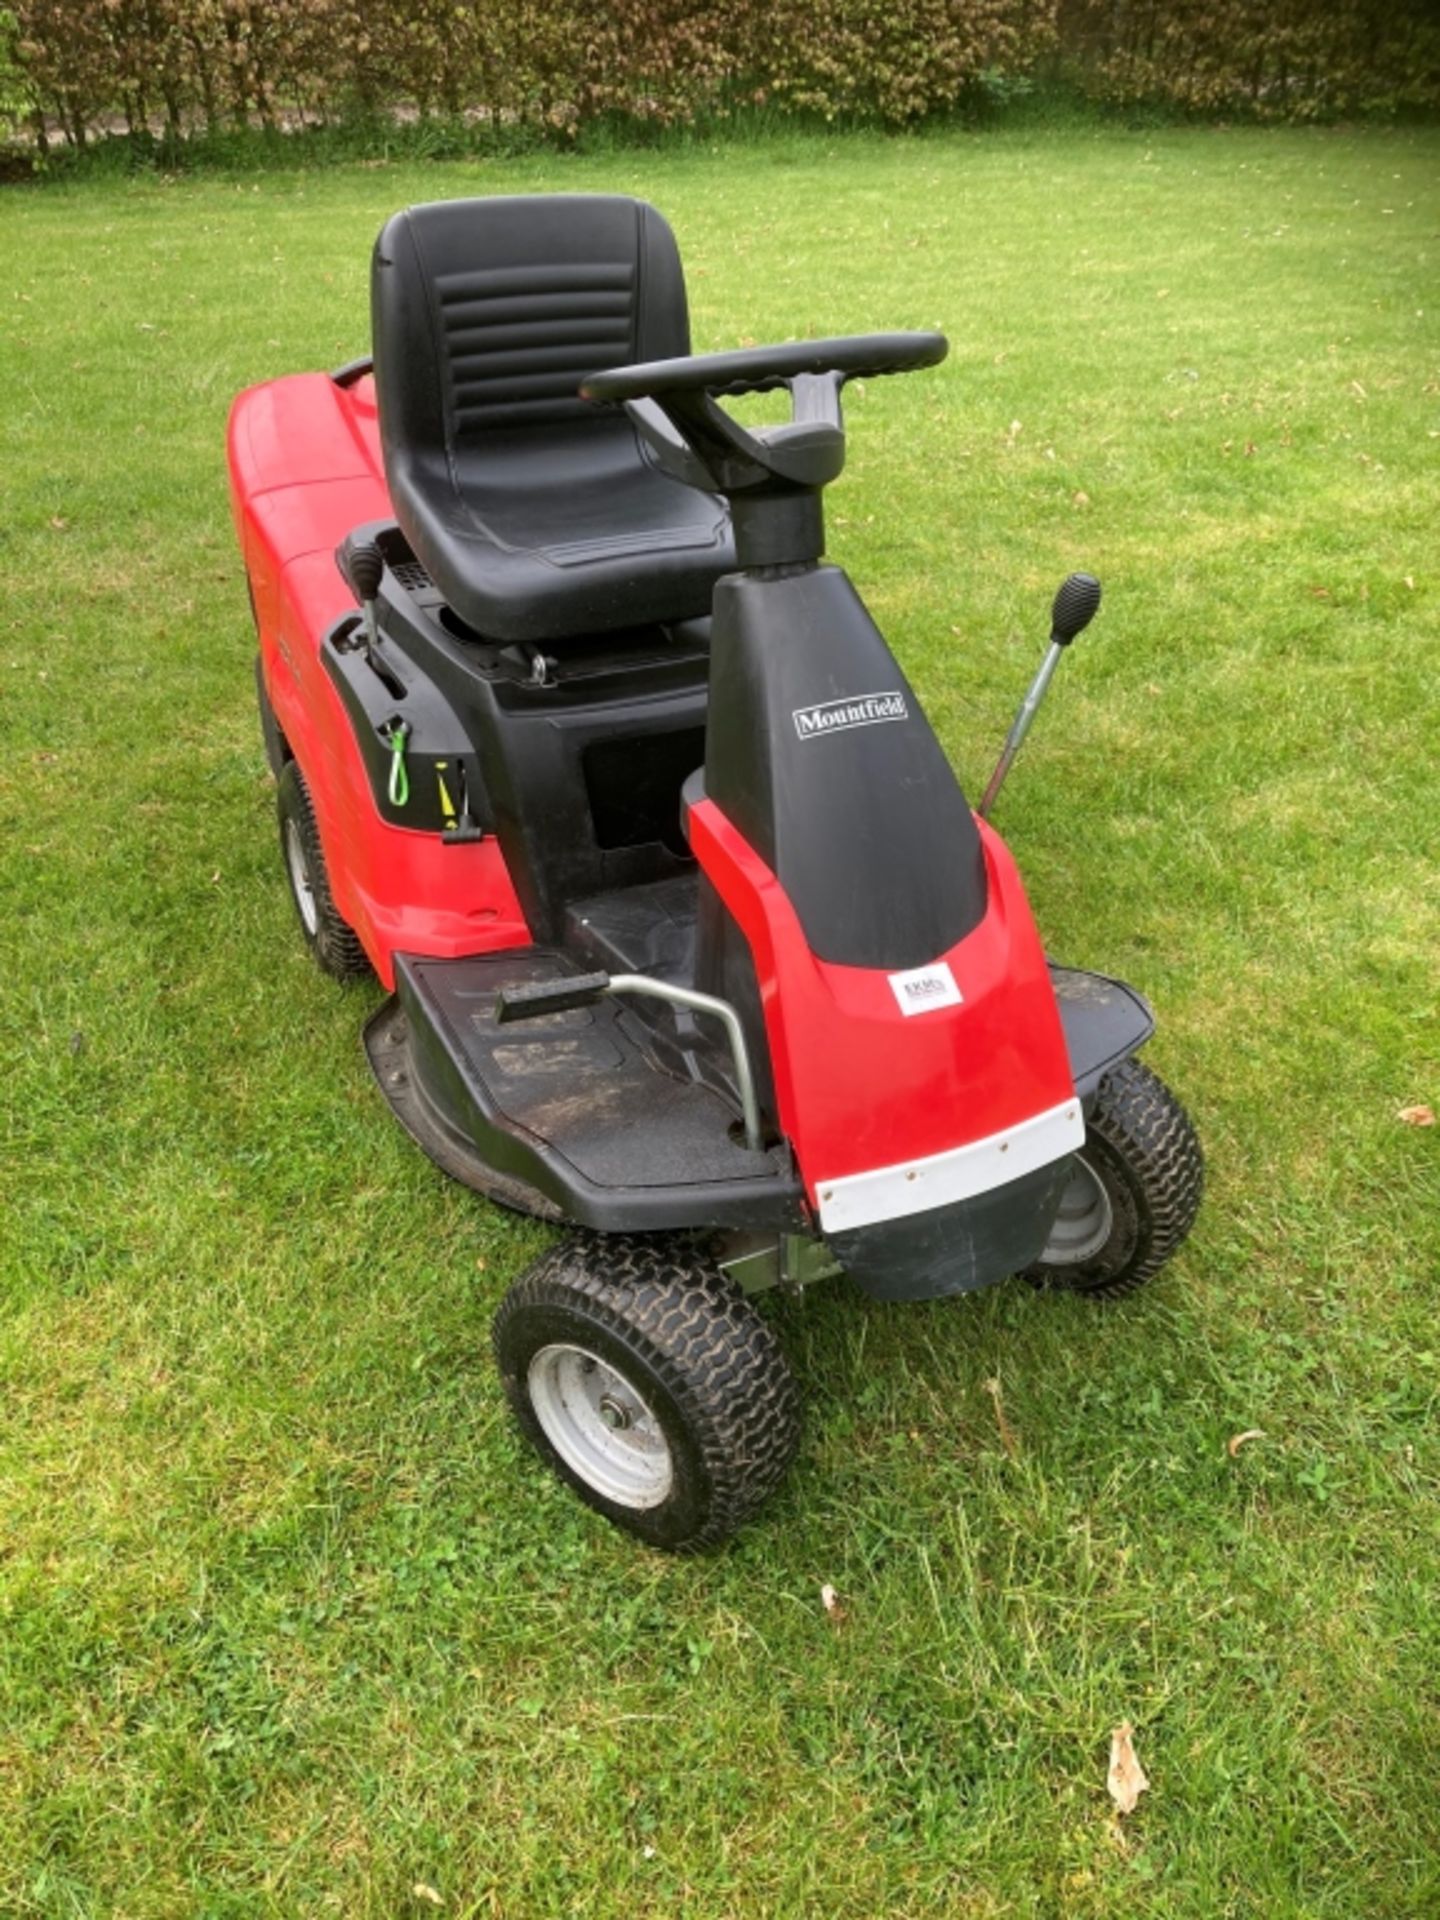 petrol driven ride on mower - Image 2 of 2